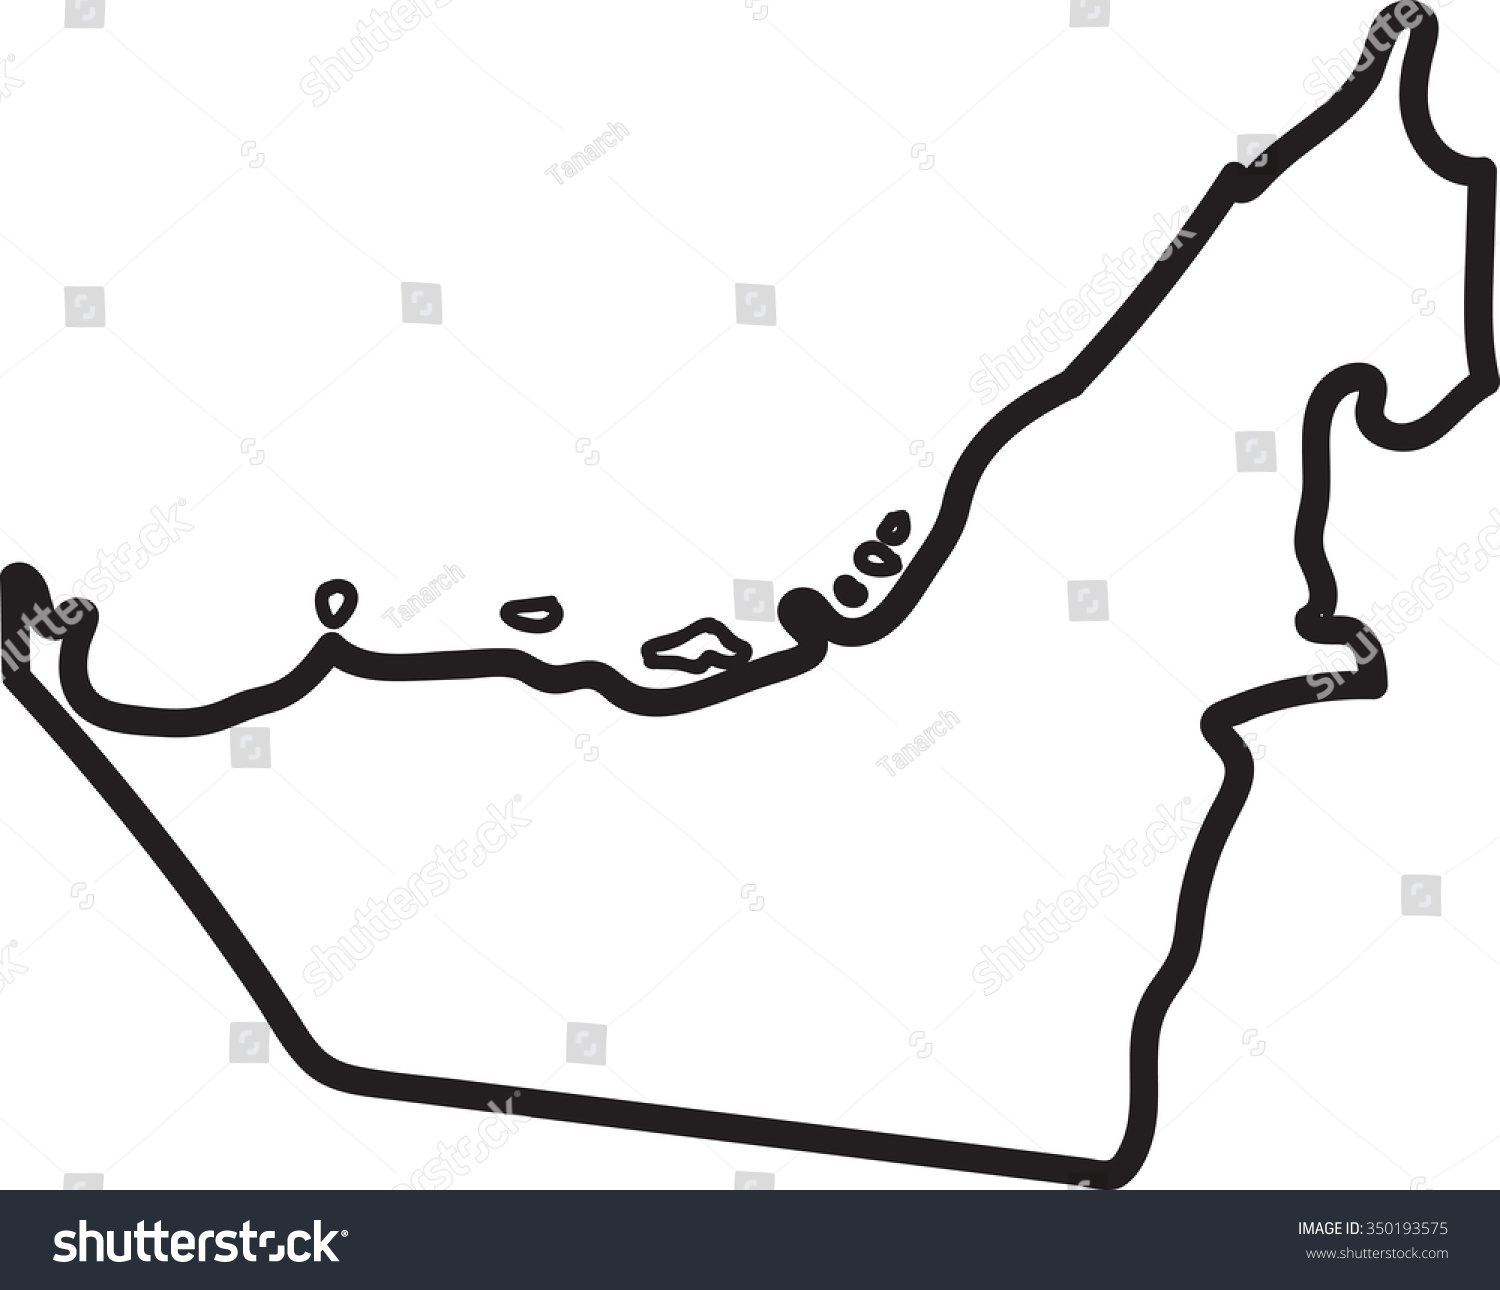 clipart of uae map - photo #6